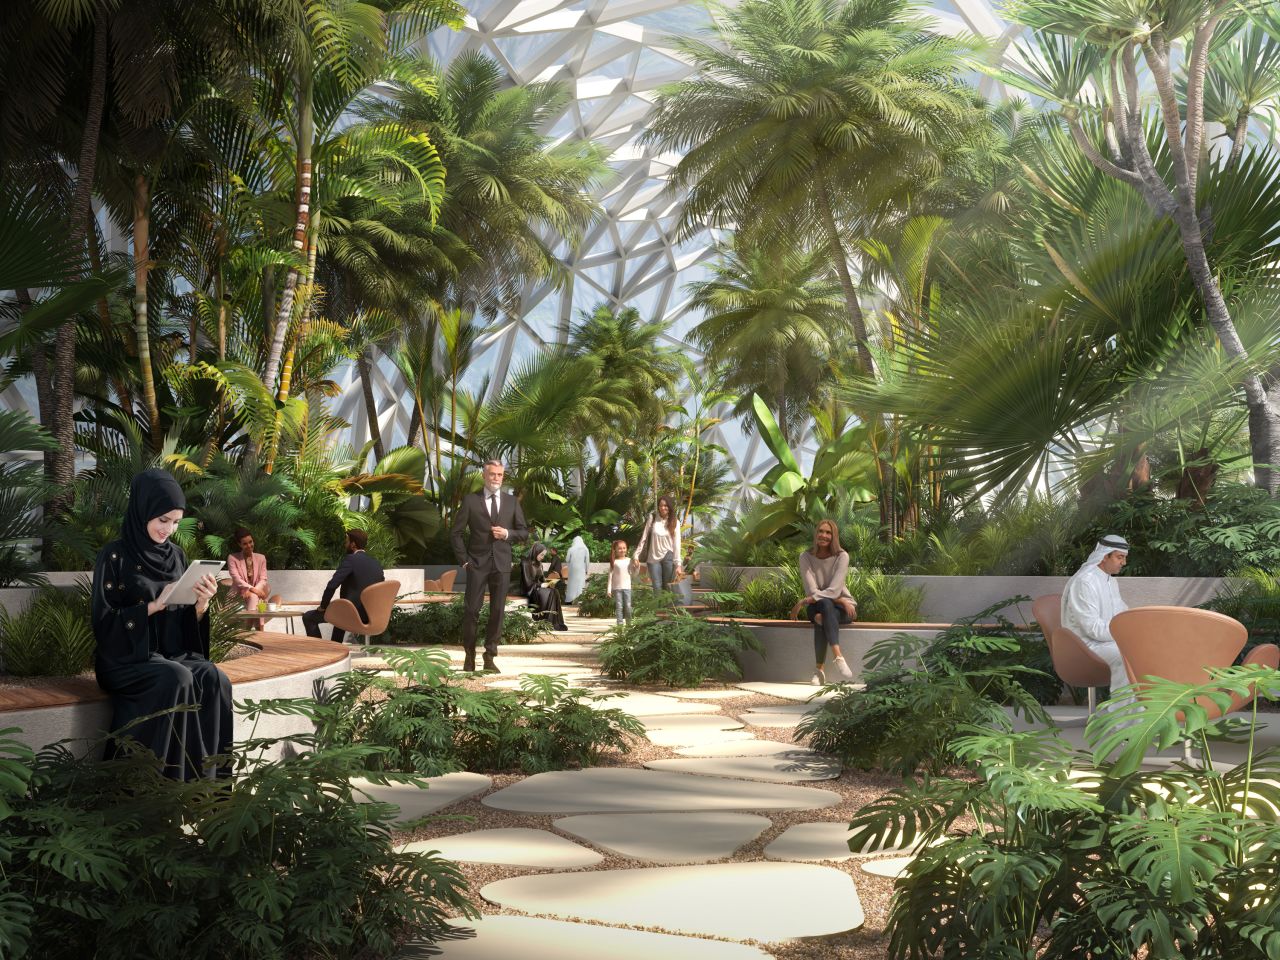 The enclosed design would offer green spaces with shade and shelter from the extreme heat of Dubai's summer months.